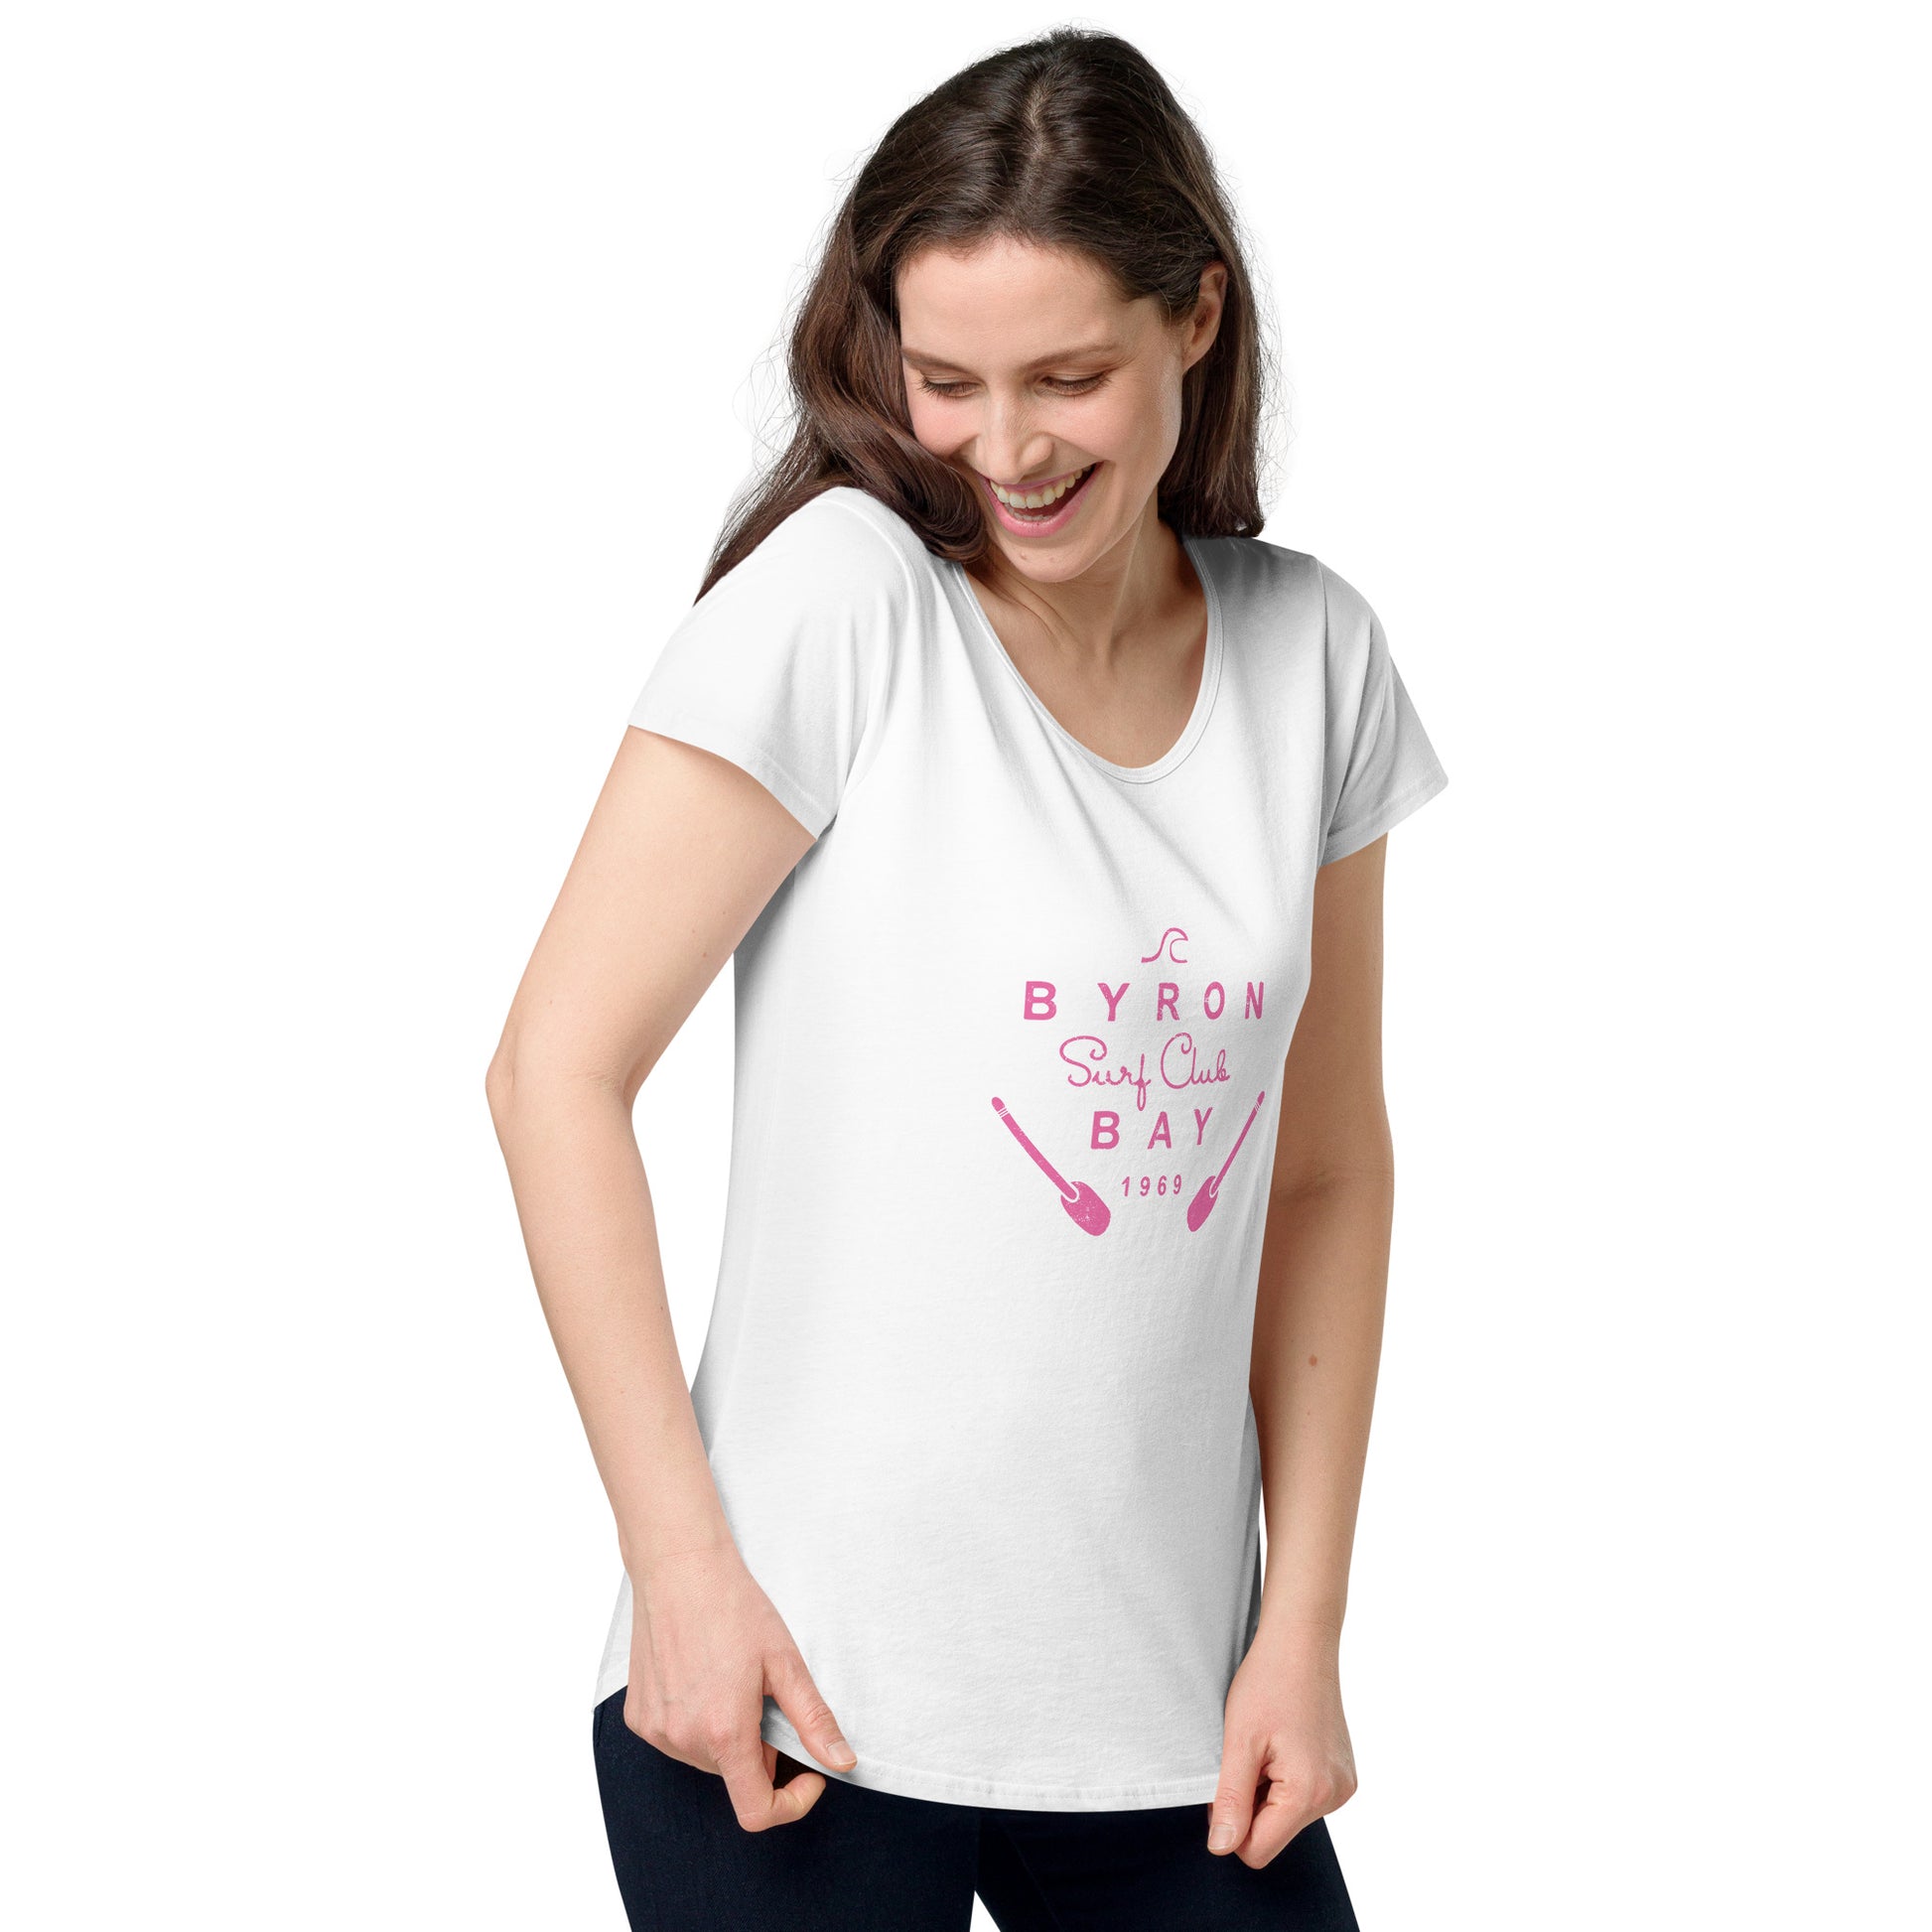  Women’s Round Neck Tee - White - Front view, being warn by woman holding the bottom of the tee - pink Byron Bay Surf Club logo on front - Genuine Byron Bay Merchandise | Produced by Go Sea Kayak Byron Bay 